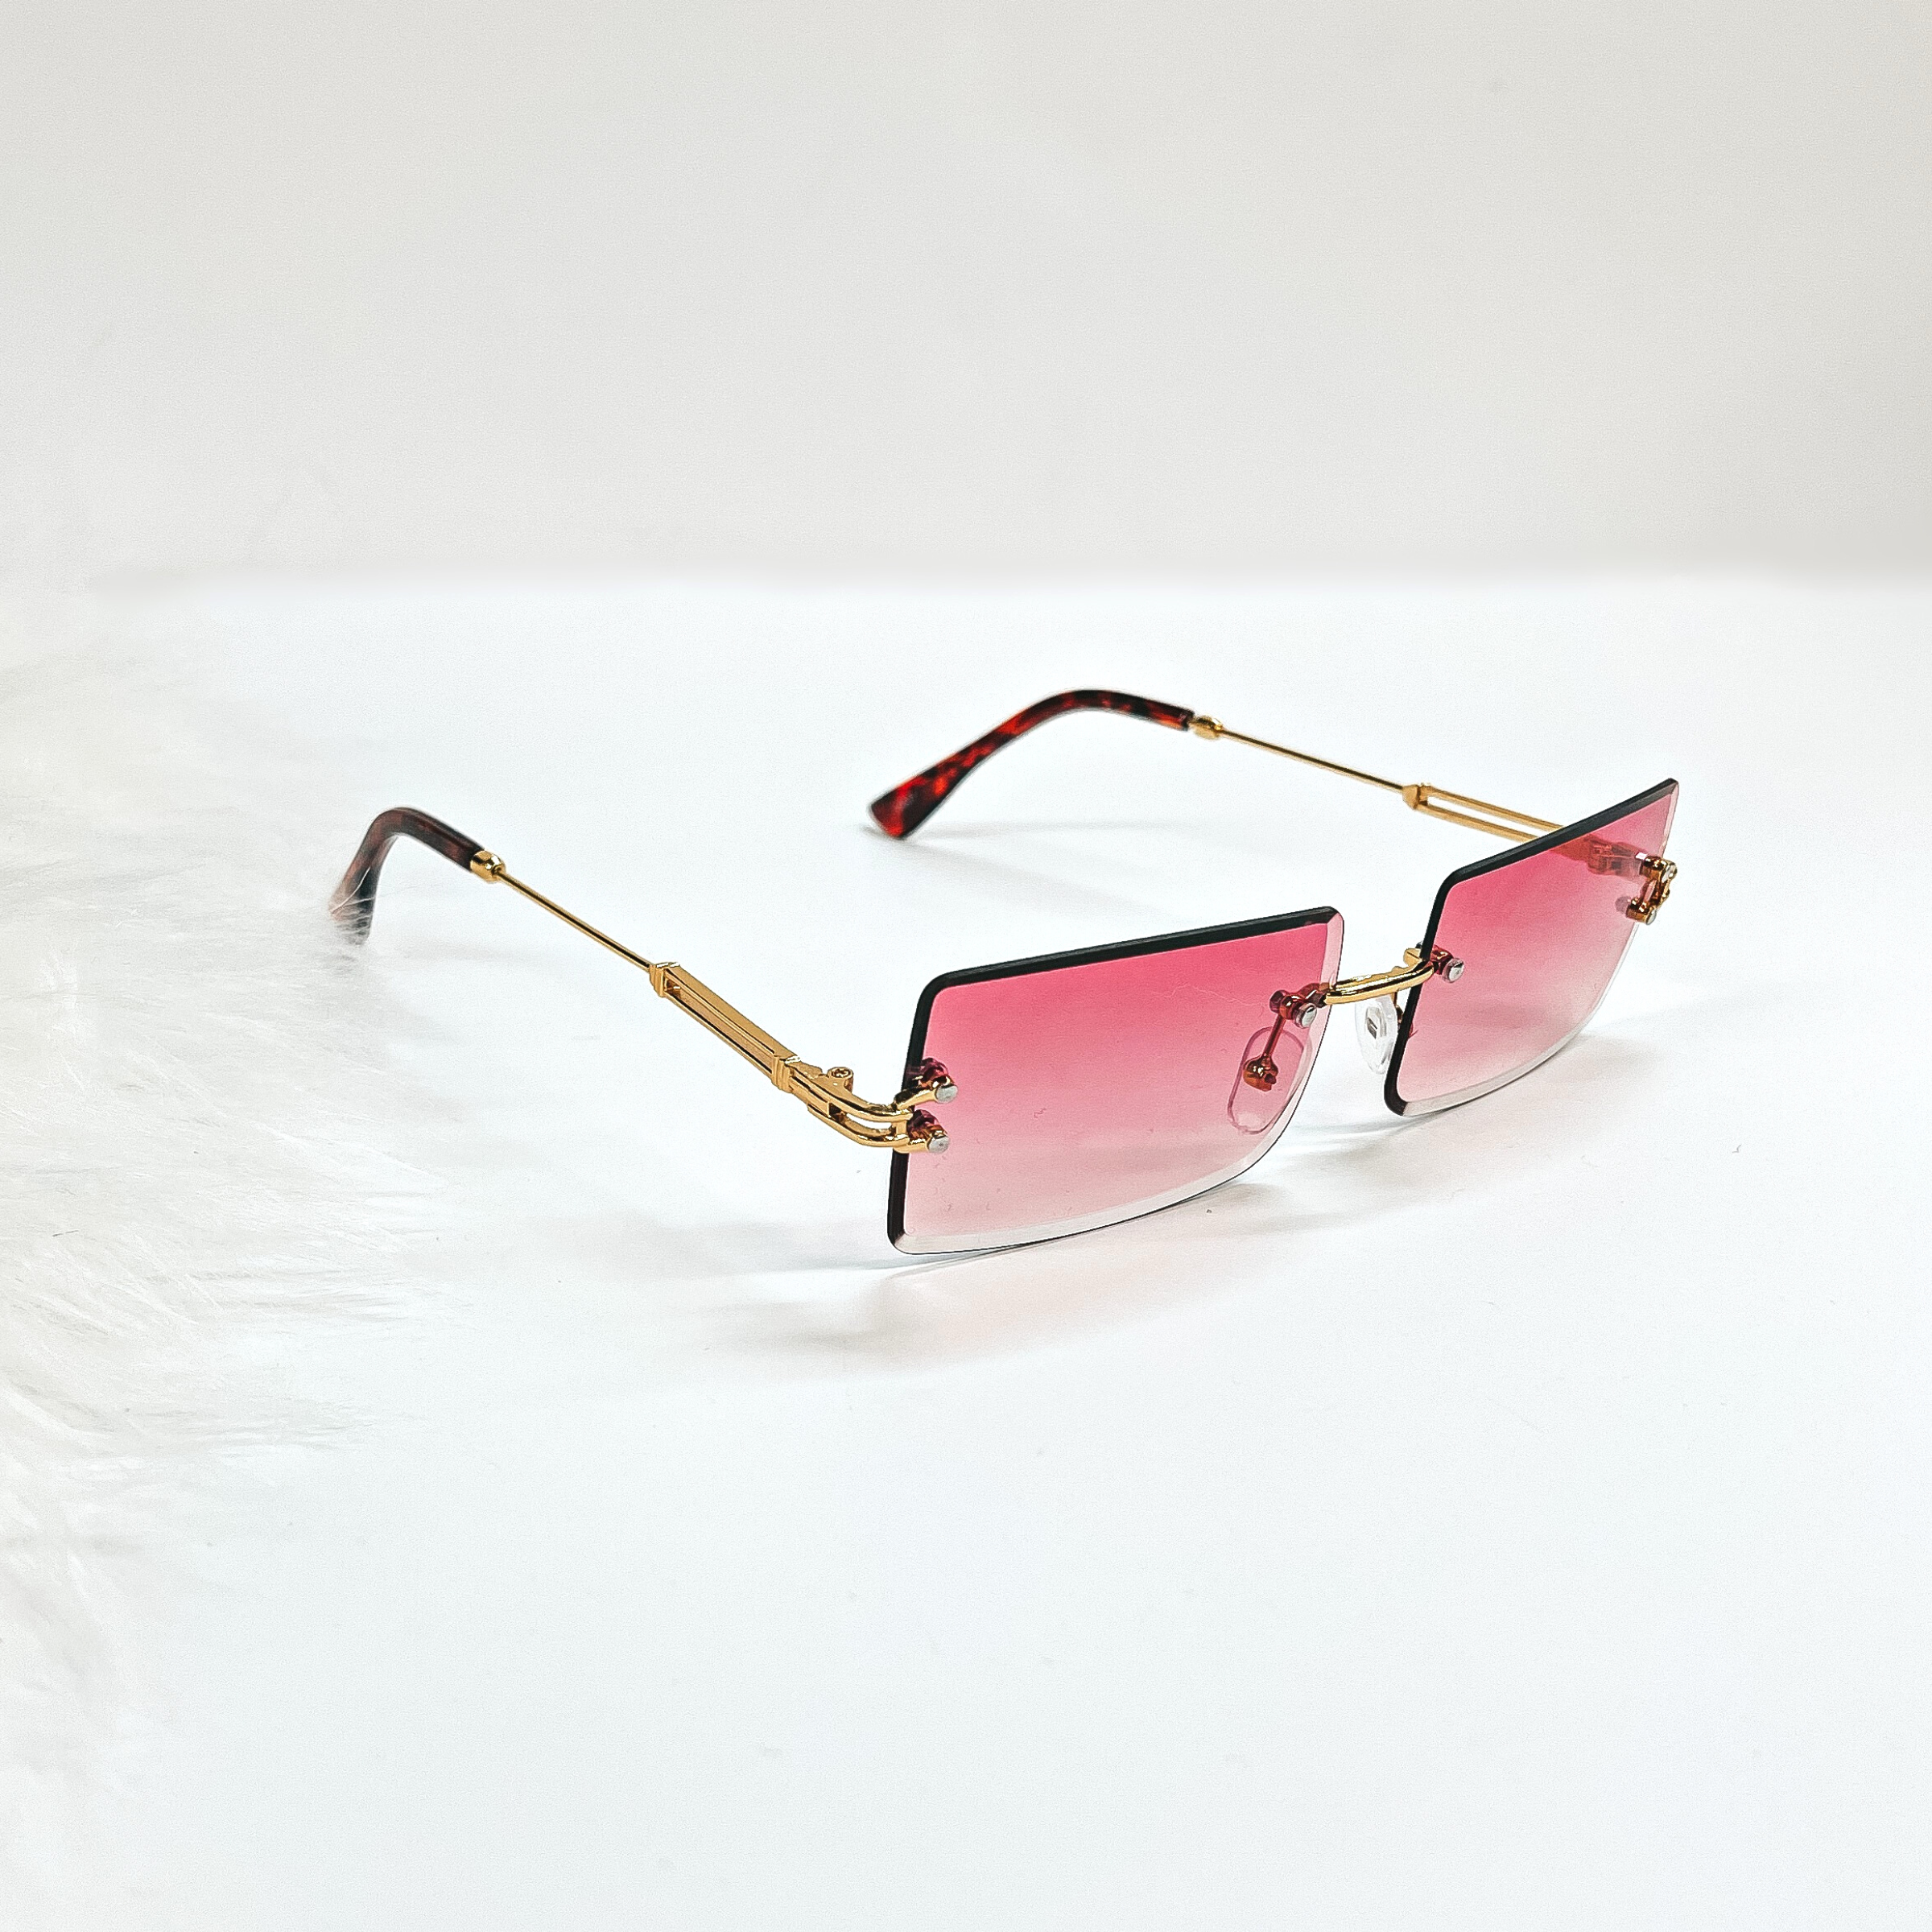 This is a pink pair of sunglasses, the lenses are pink  with no frame and they have  gold connectors. The ear pieces are tortuoise print. These sunglasses are taken  on a white background with a piece of white fur in the side as decor.